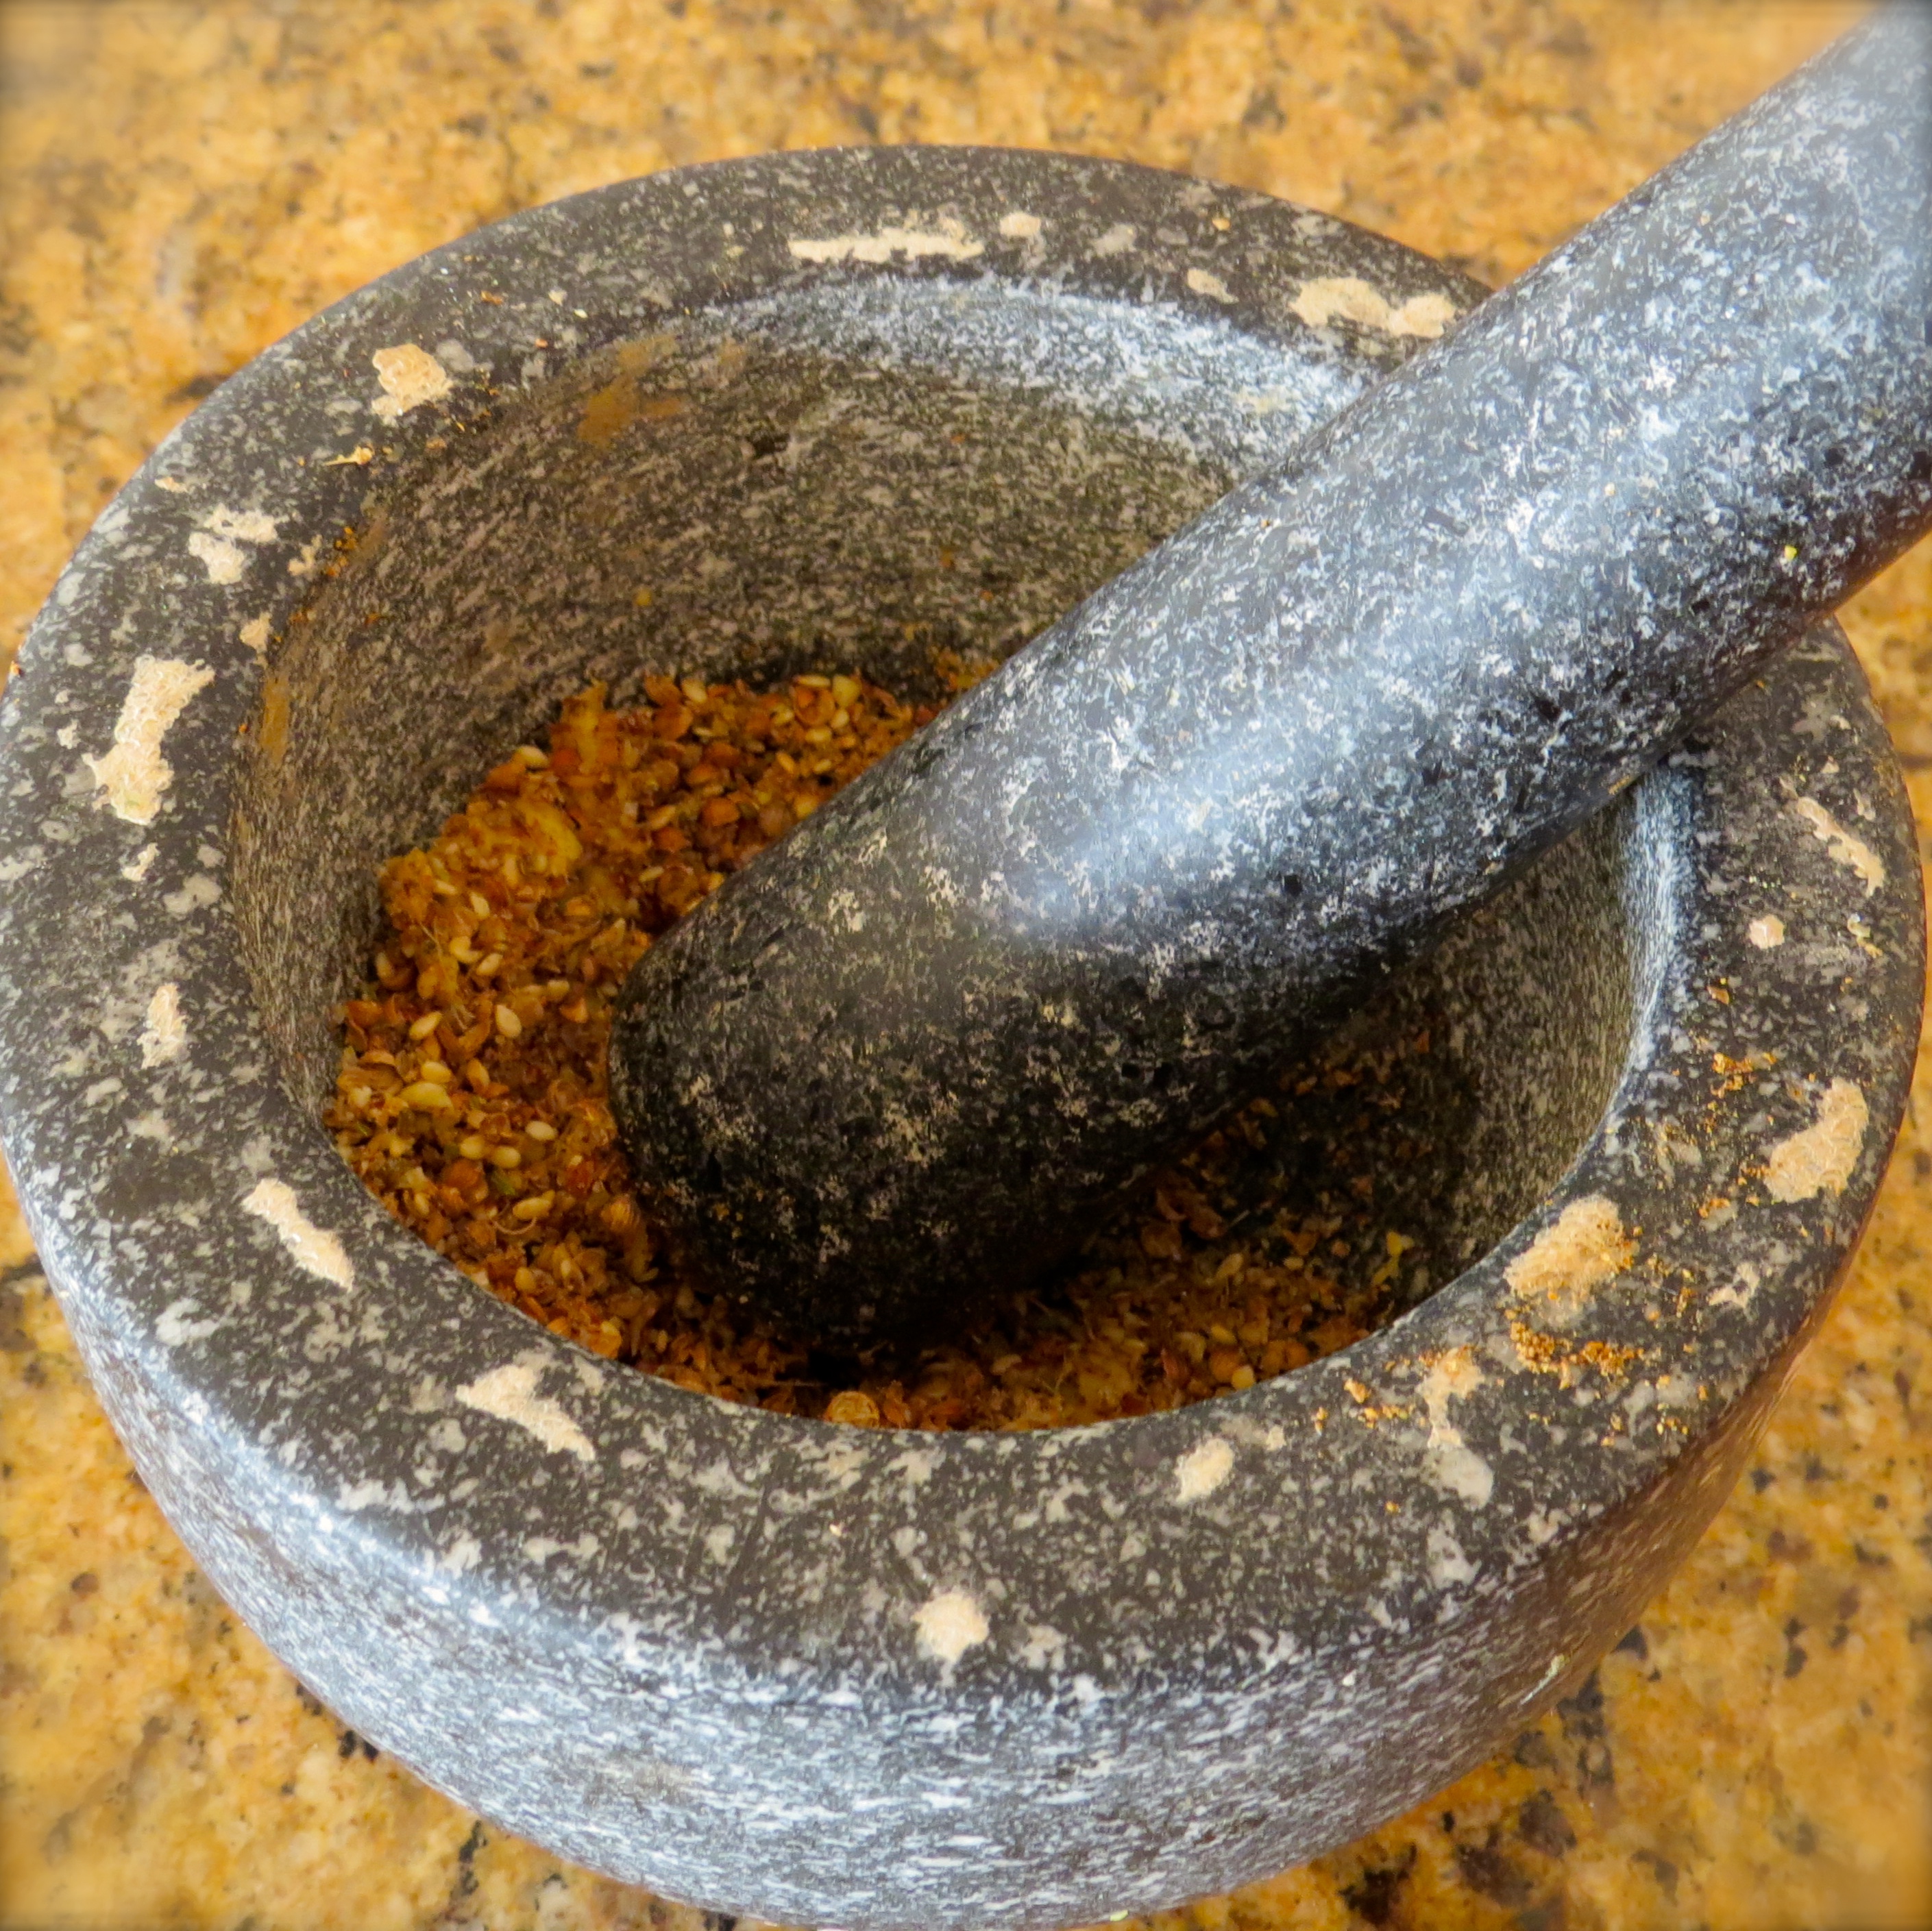 The spices and ginger slices are thrown into the mortar and coarsely crushed with my trusty pestle.